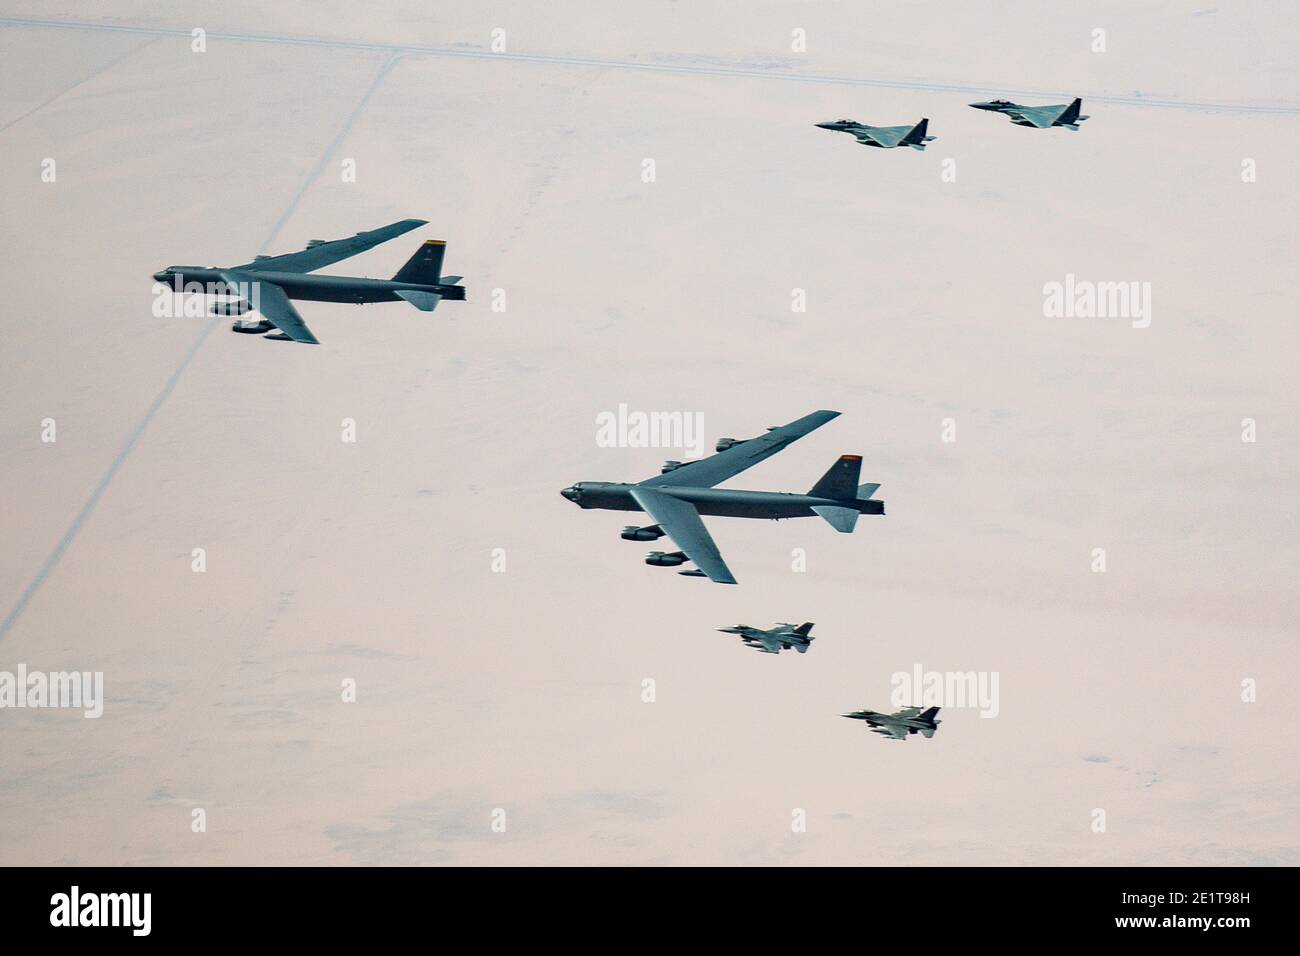 Saudi Arabia, Saudi Arabia. 07th Jan, 2021. U.S. Air Force B-52 Stratofortress strategic bomber aircraft are escorted by Royal Saudi Arabian Air Force F-15S/A fighters, right, and U.S. Air Force F-16 Fighting Falcons as they fly over Saudi airspace January 7, 2021 in Saudi Arabia. The bomber and escort is a show of force mission as a message to Iran. Credit: Planetpix/Alamy Live News Stock Photo